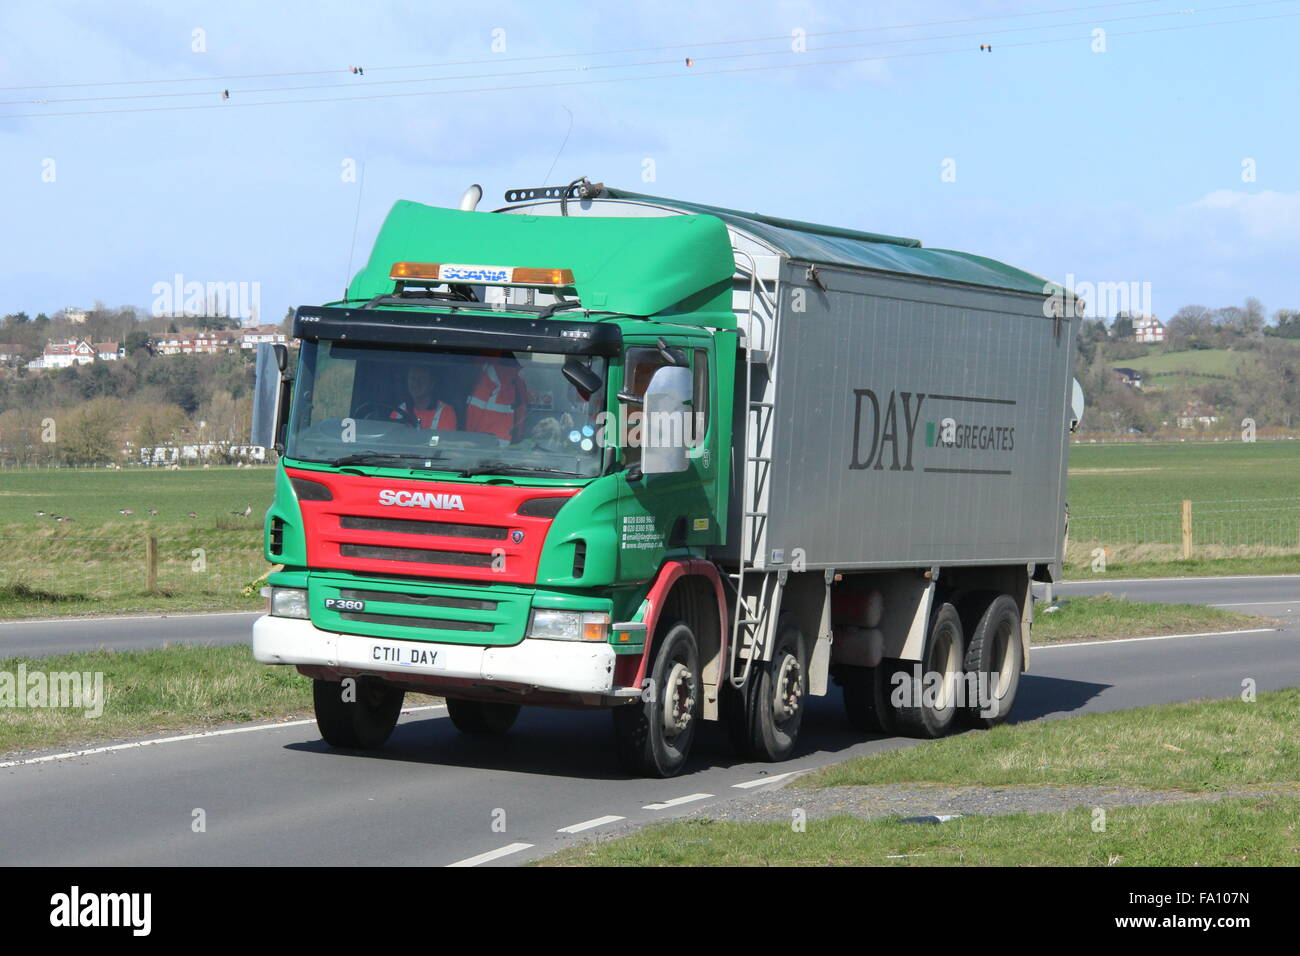 A DAY AGGREGATES GROUP SCANIA BULK TIPPER TRUCK LORRY Stock Photo